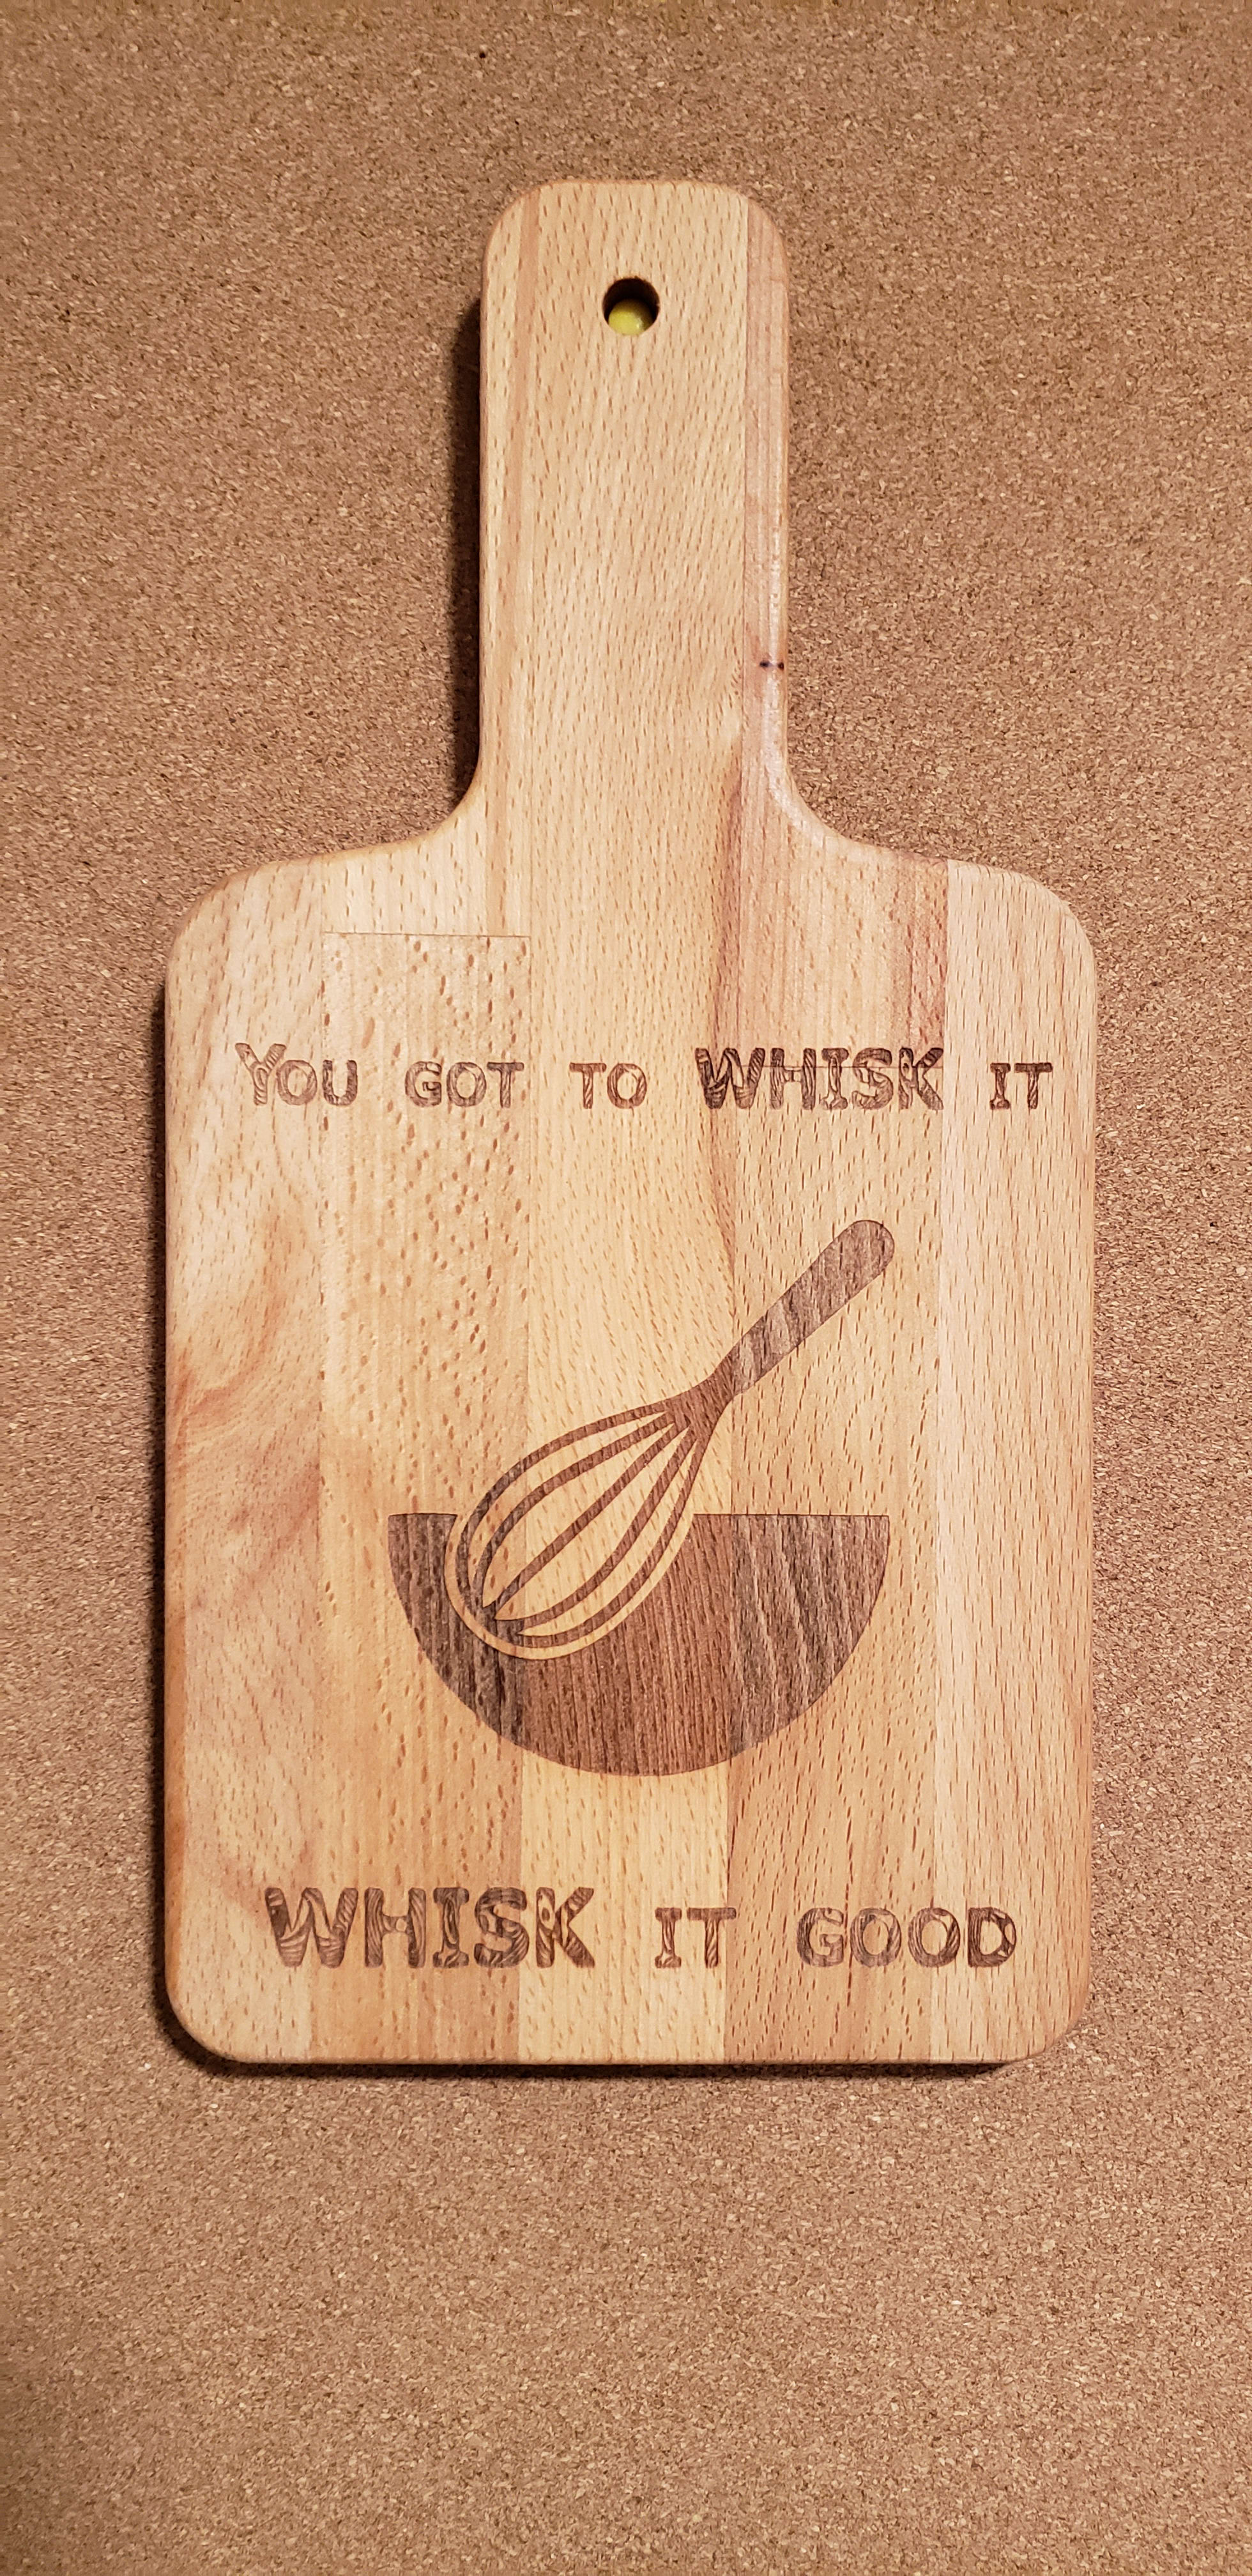 Laser-Engraved Gifts – 5 Great Ideas